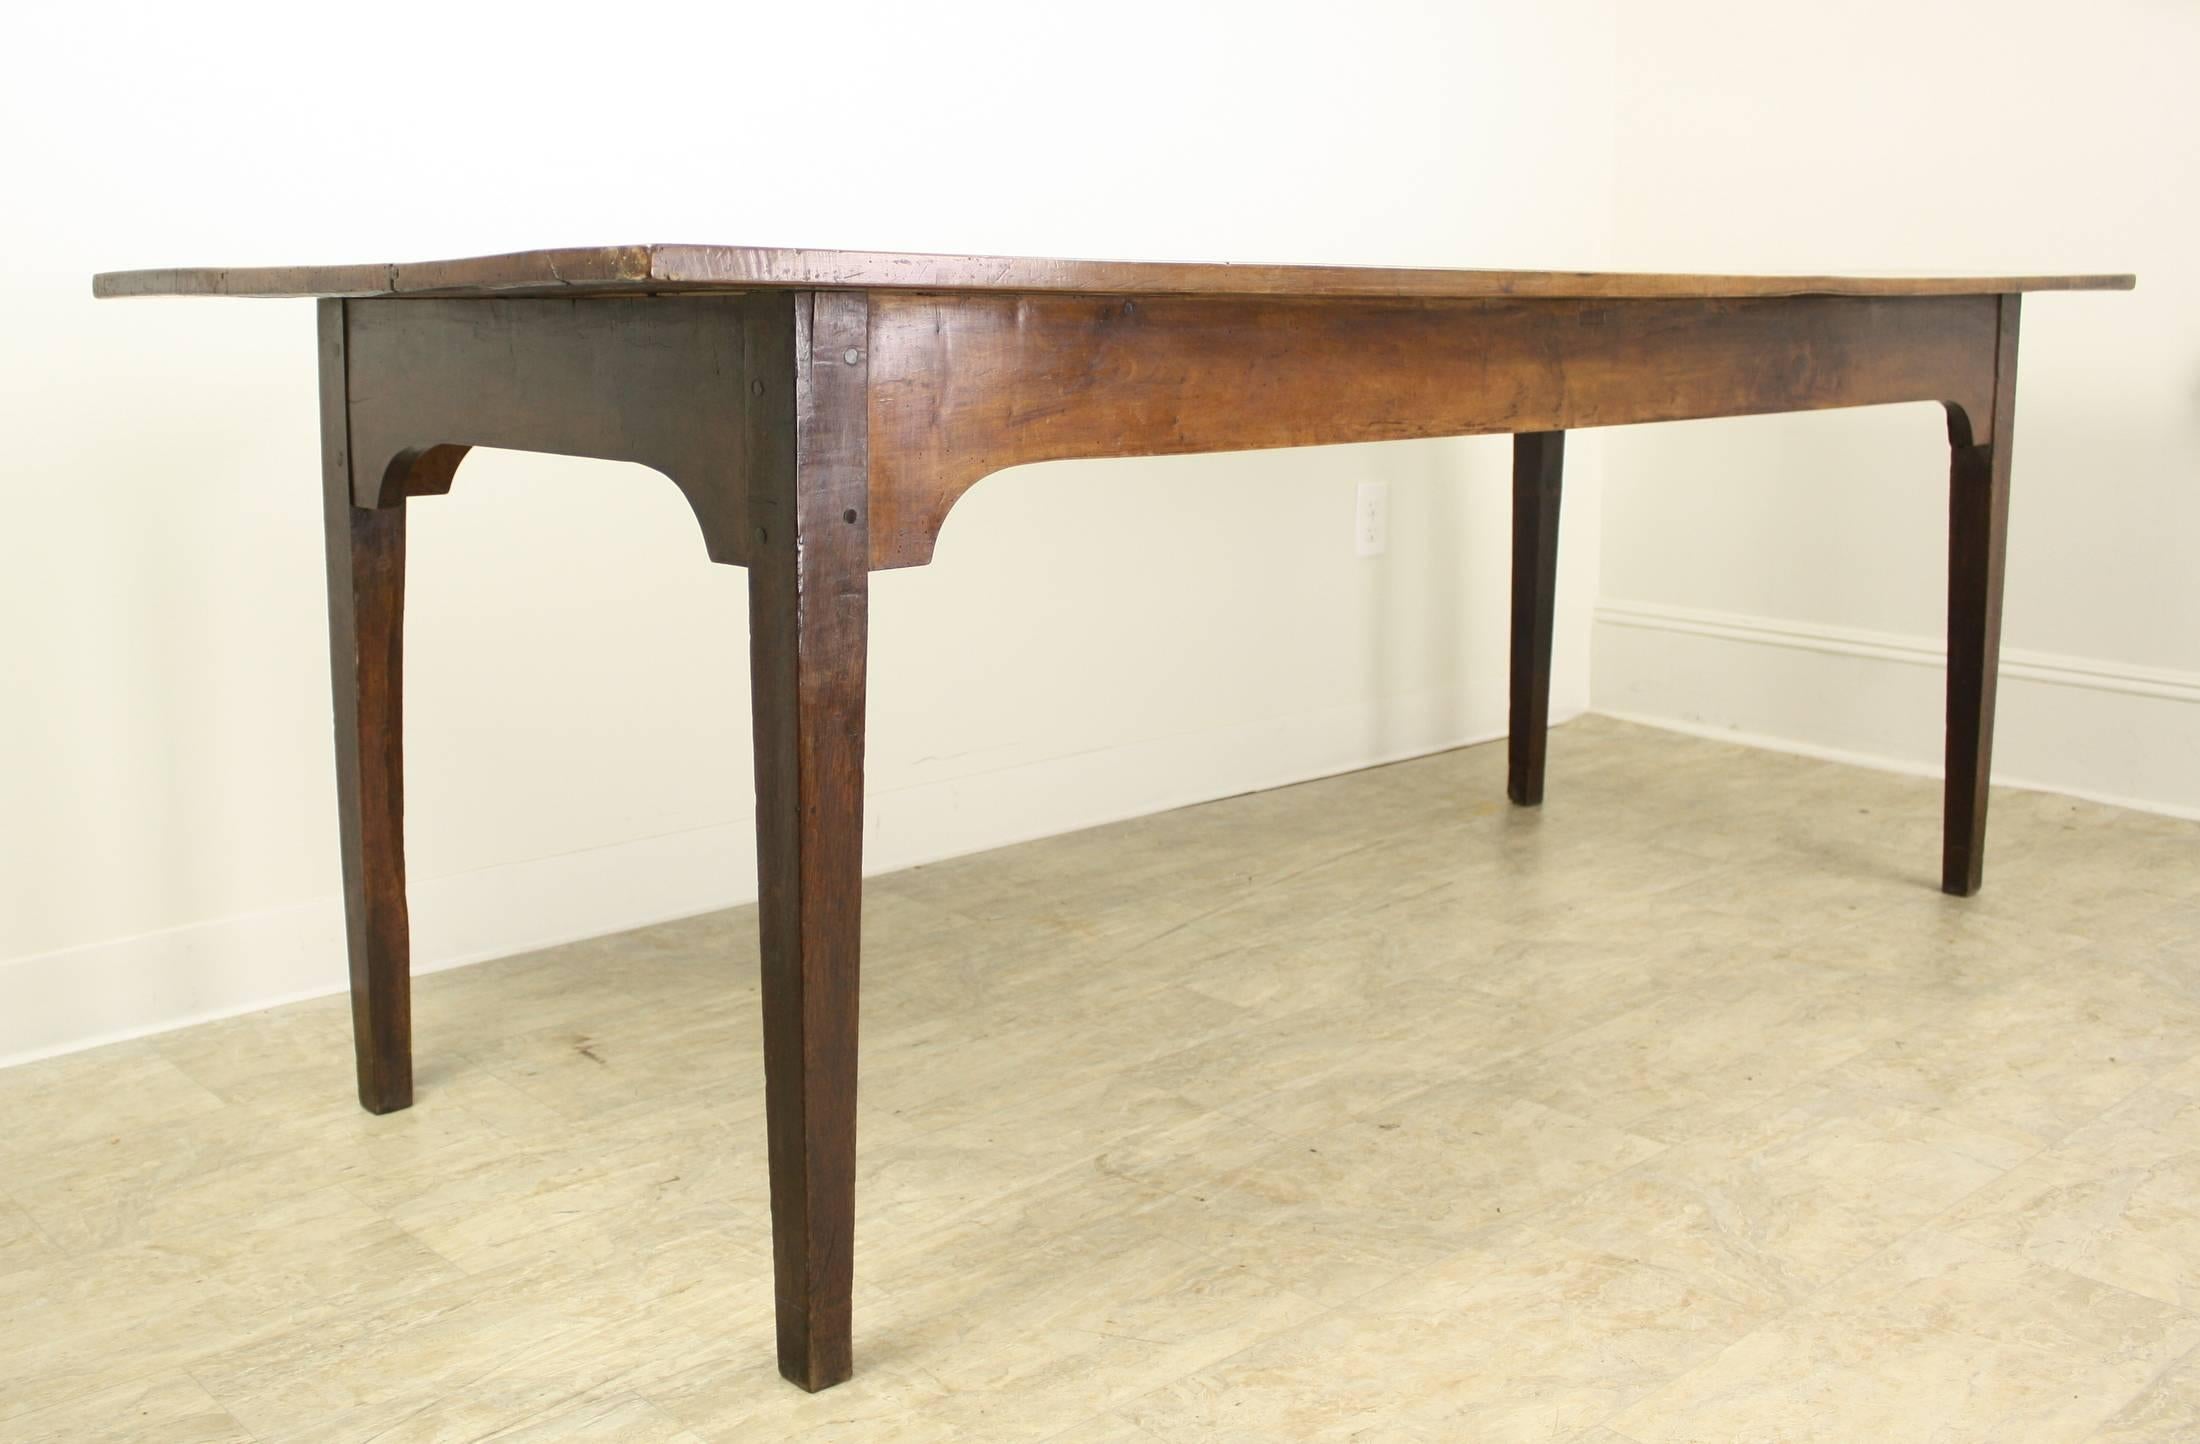 A finely grained and wonderfully colored applewood farm table, with spectacular patina and glow. Gracefully carved apron adds an eye catching design detail, and at 24.5